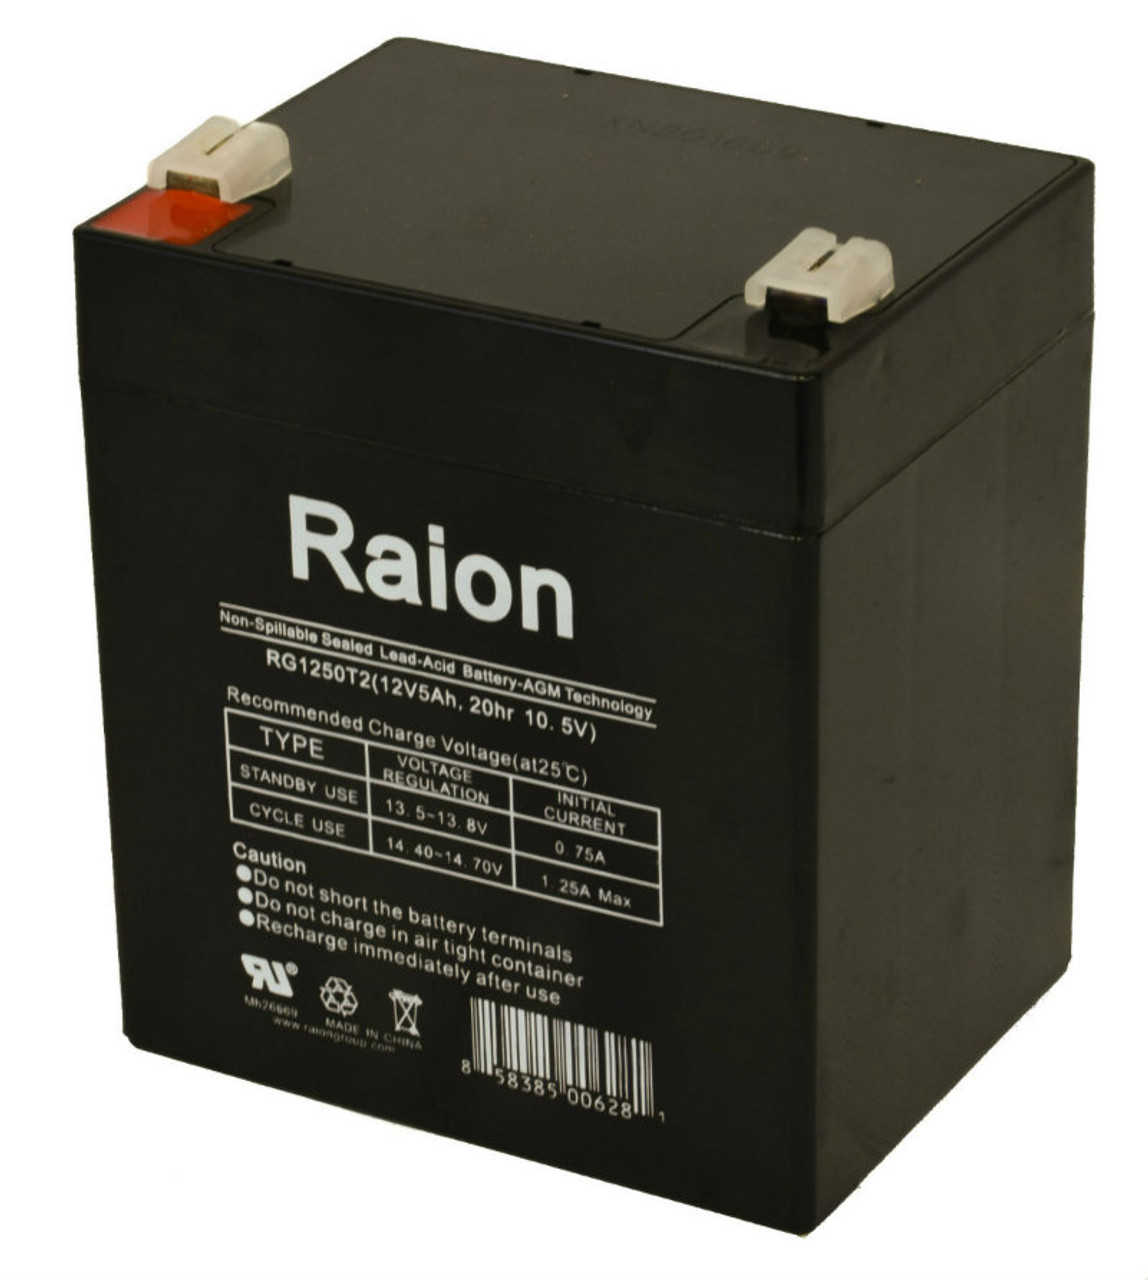 Raion Power RG1250T1 Replacement Battery for Phantom Cables BT-12V-5AF1